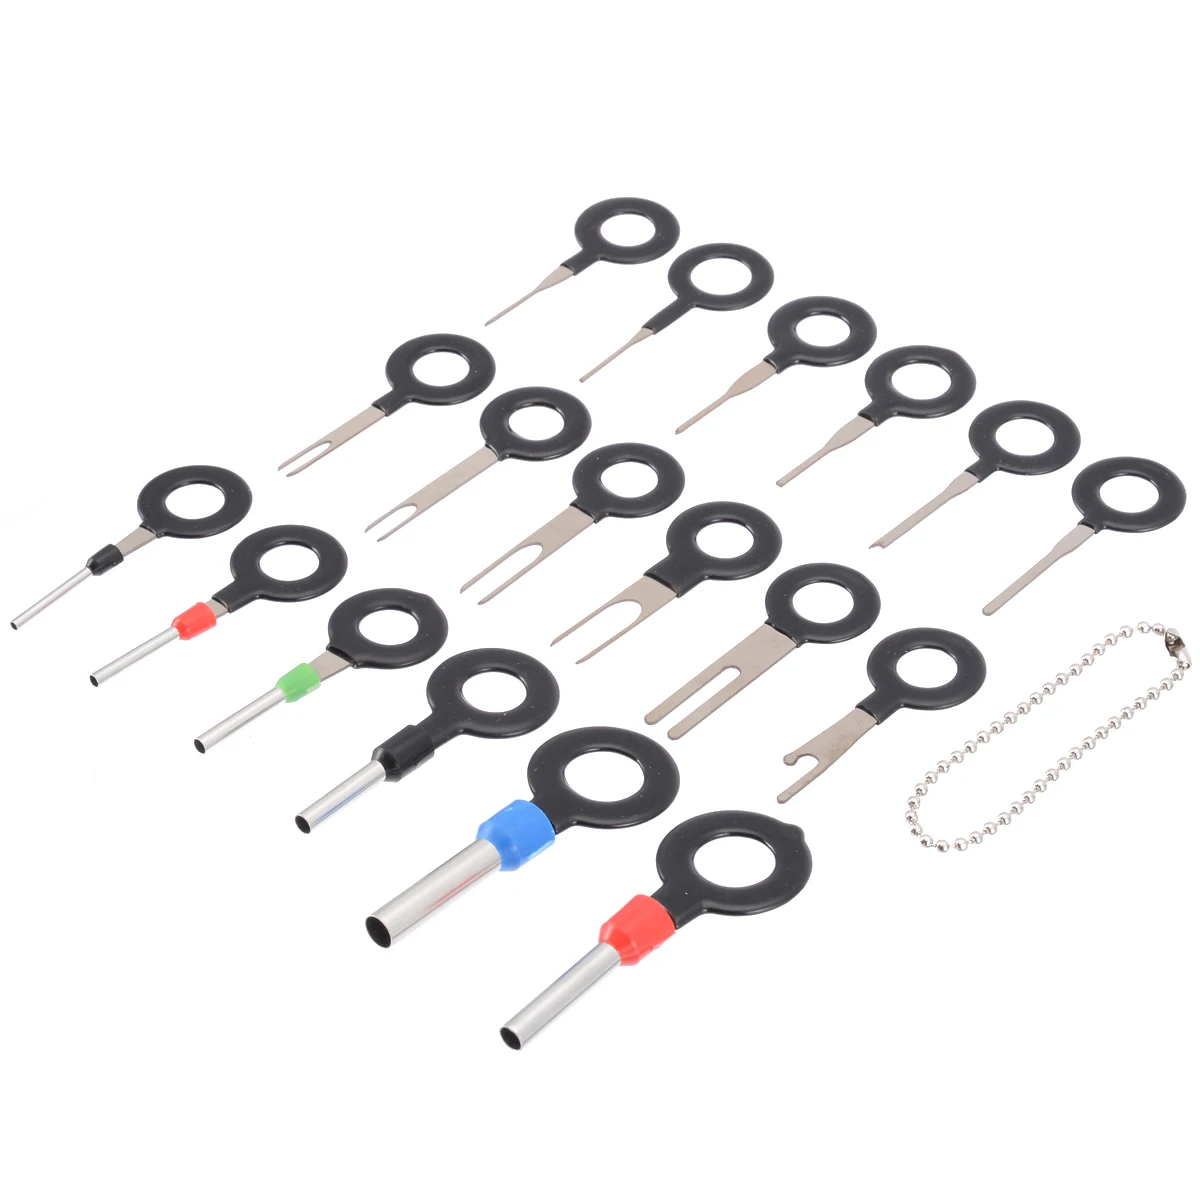 Brand New 18Pcs/set Car Electrical Terminal Wiring Crimp Connector Pin Removal Key Tool Kit Hot Sale